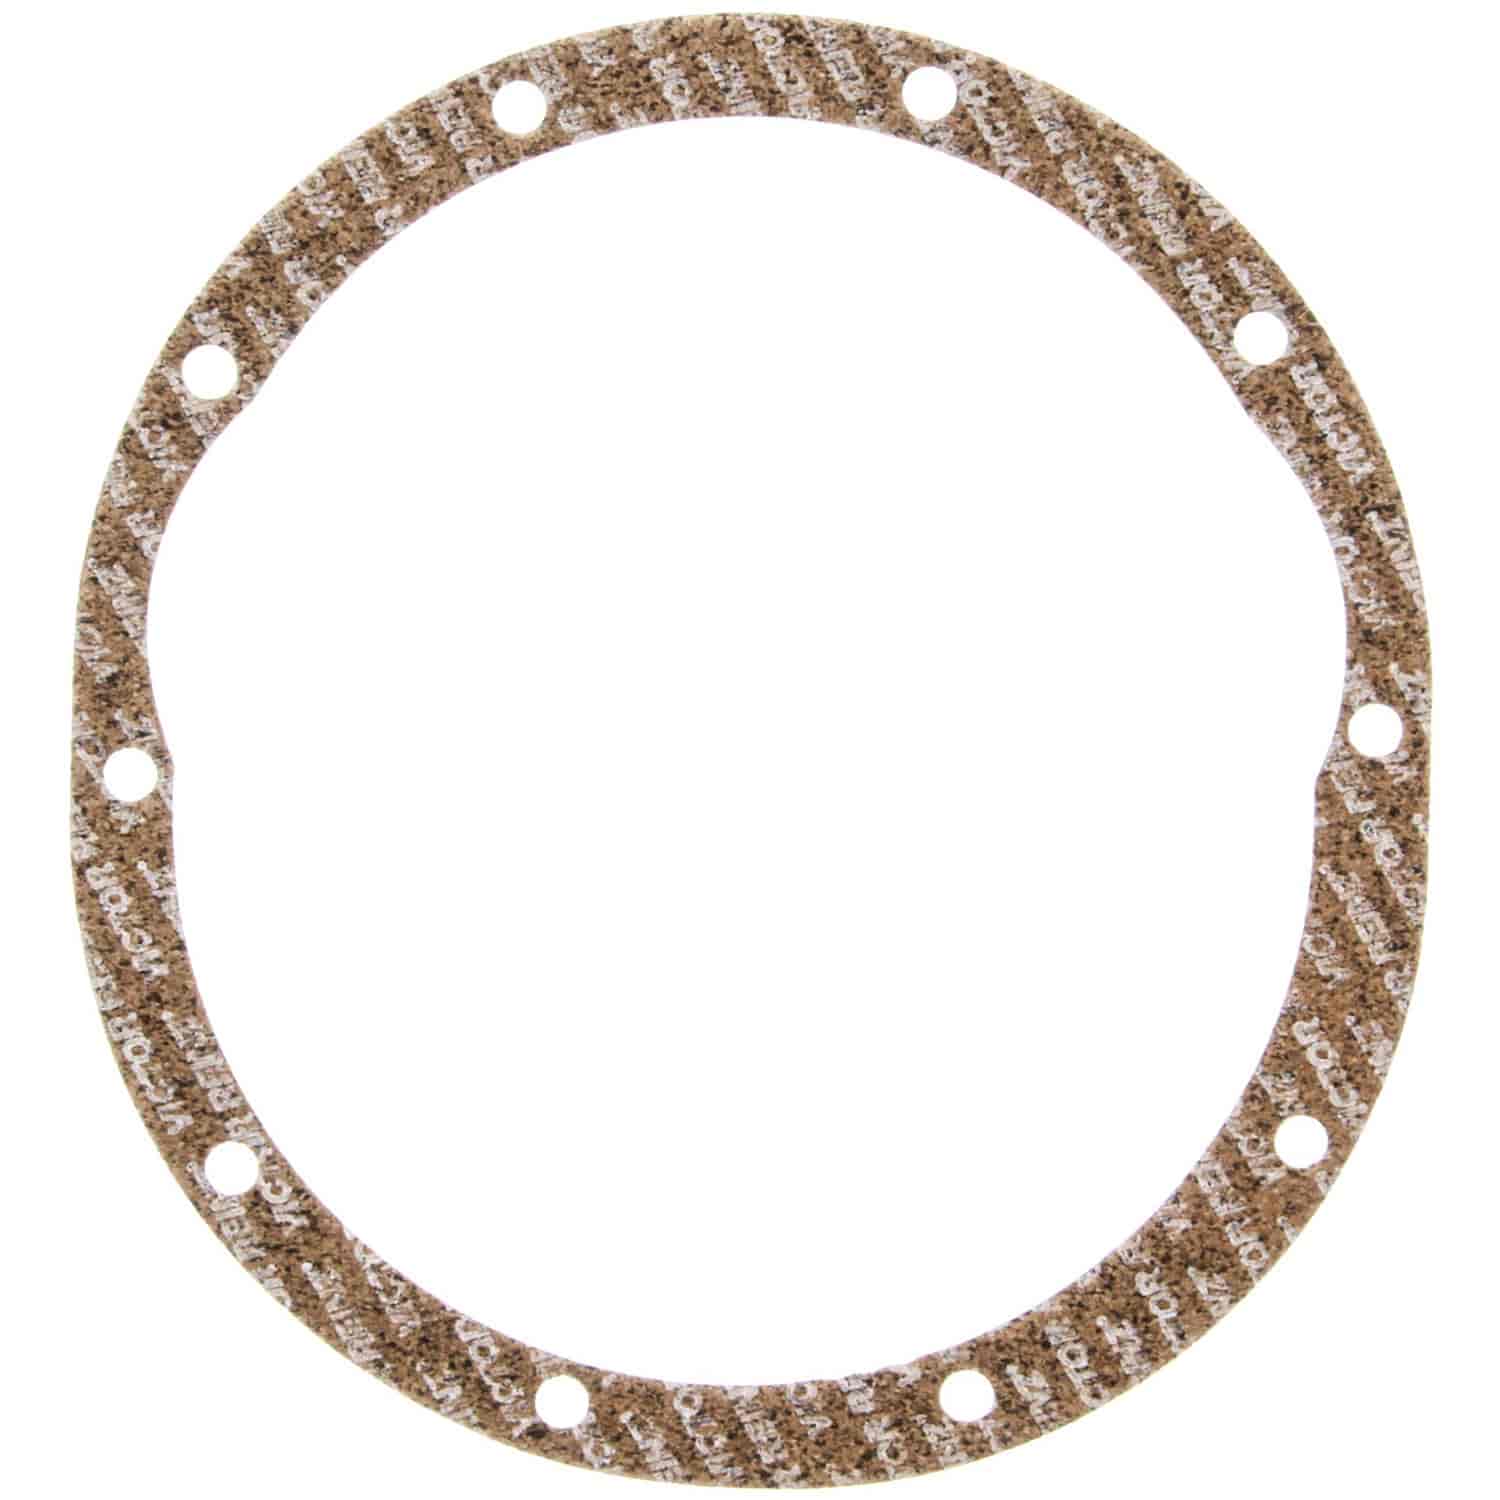 Differential Carrier Gasket 1960-1979 Ford 9" Gear